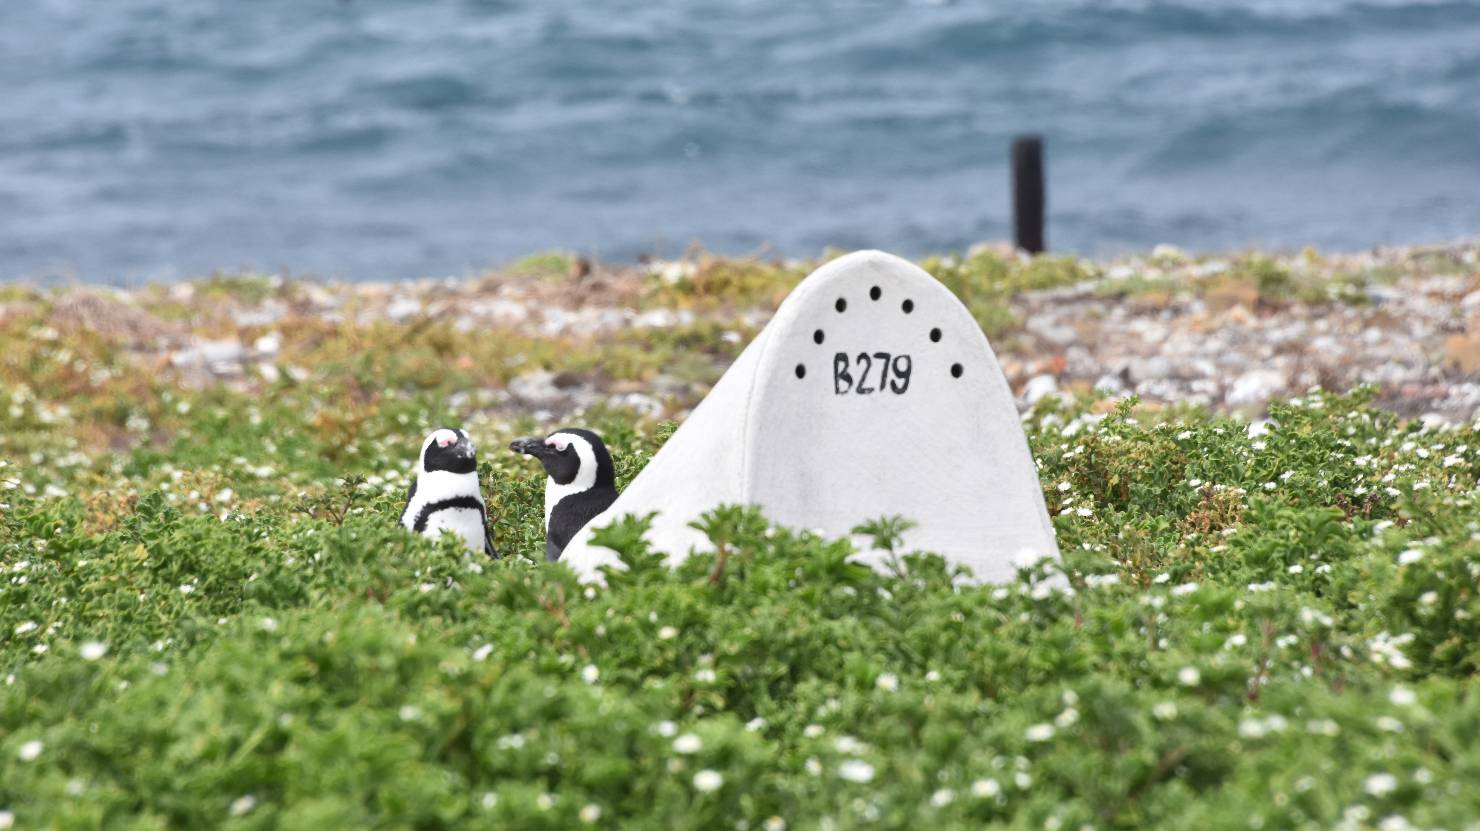 African penguins face long odds – but new homes can stack the deck